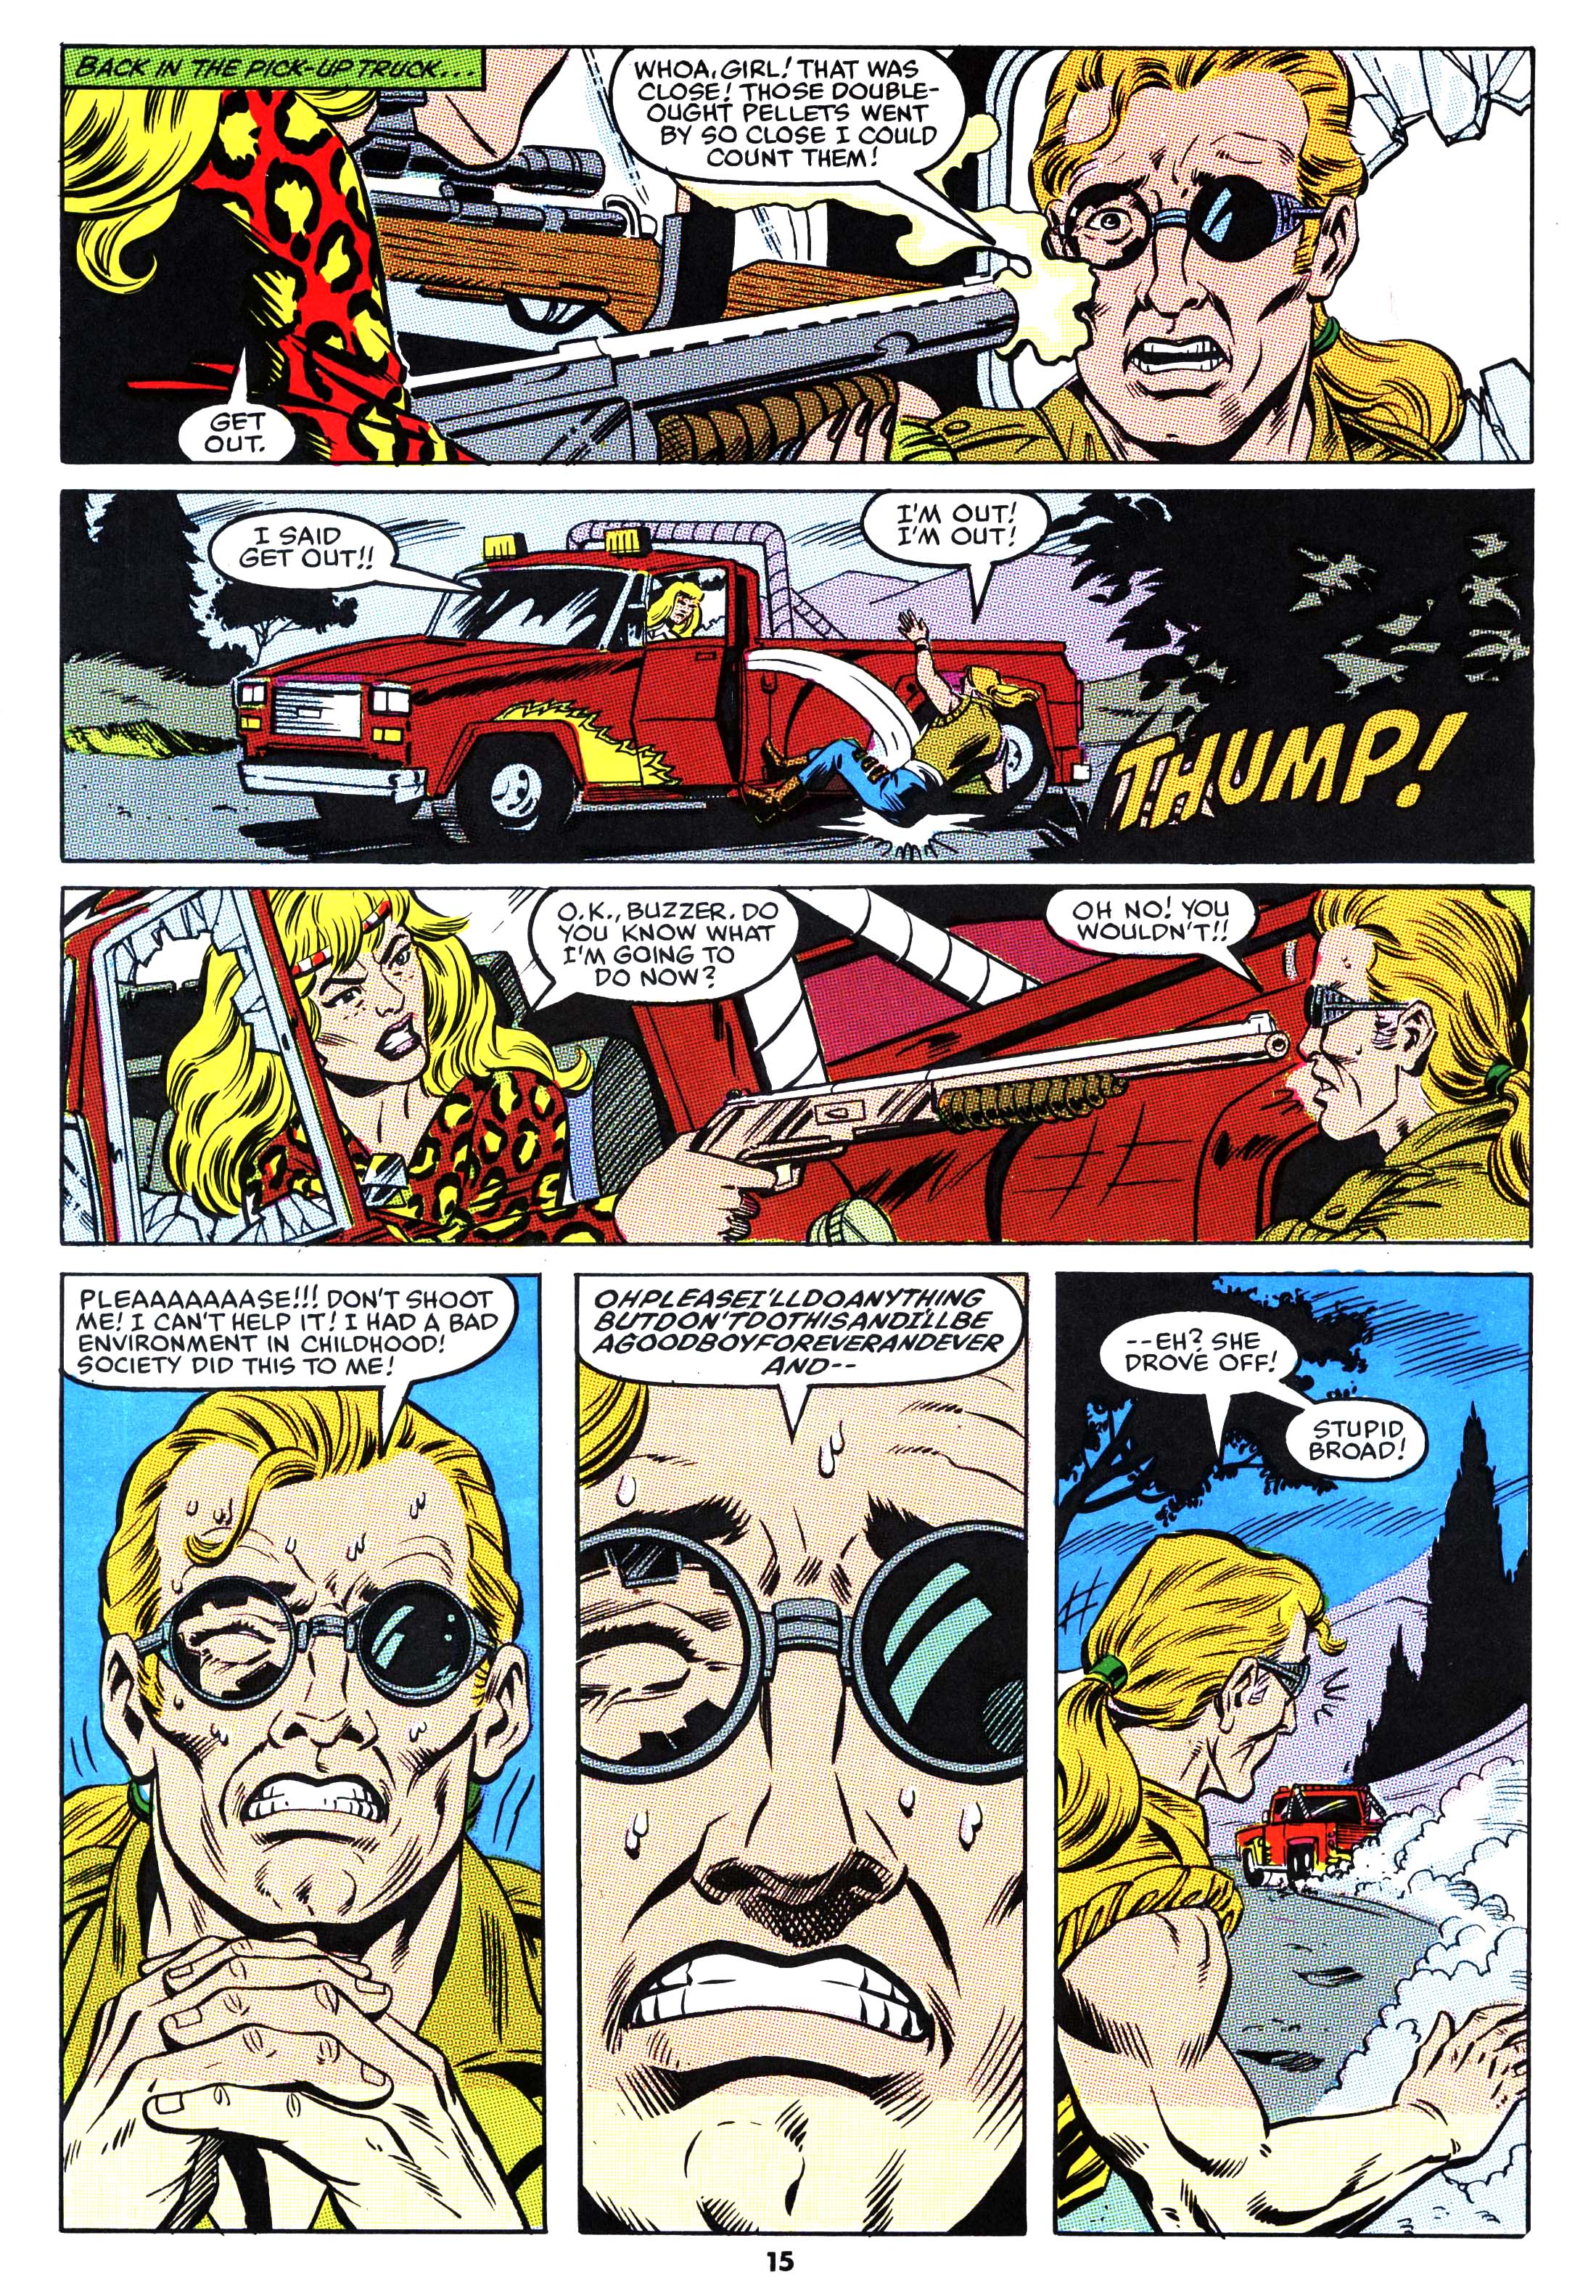 Read online Action Force comic -  Issue #40 - 15